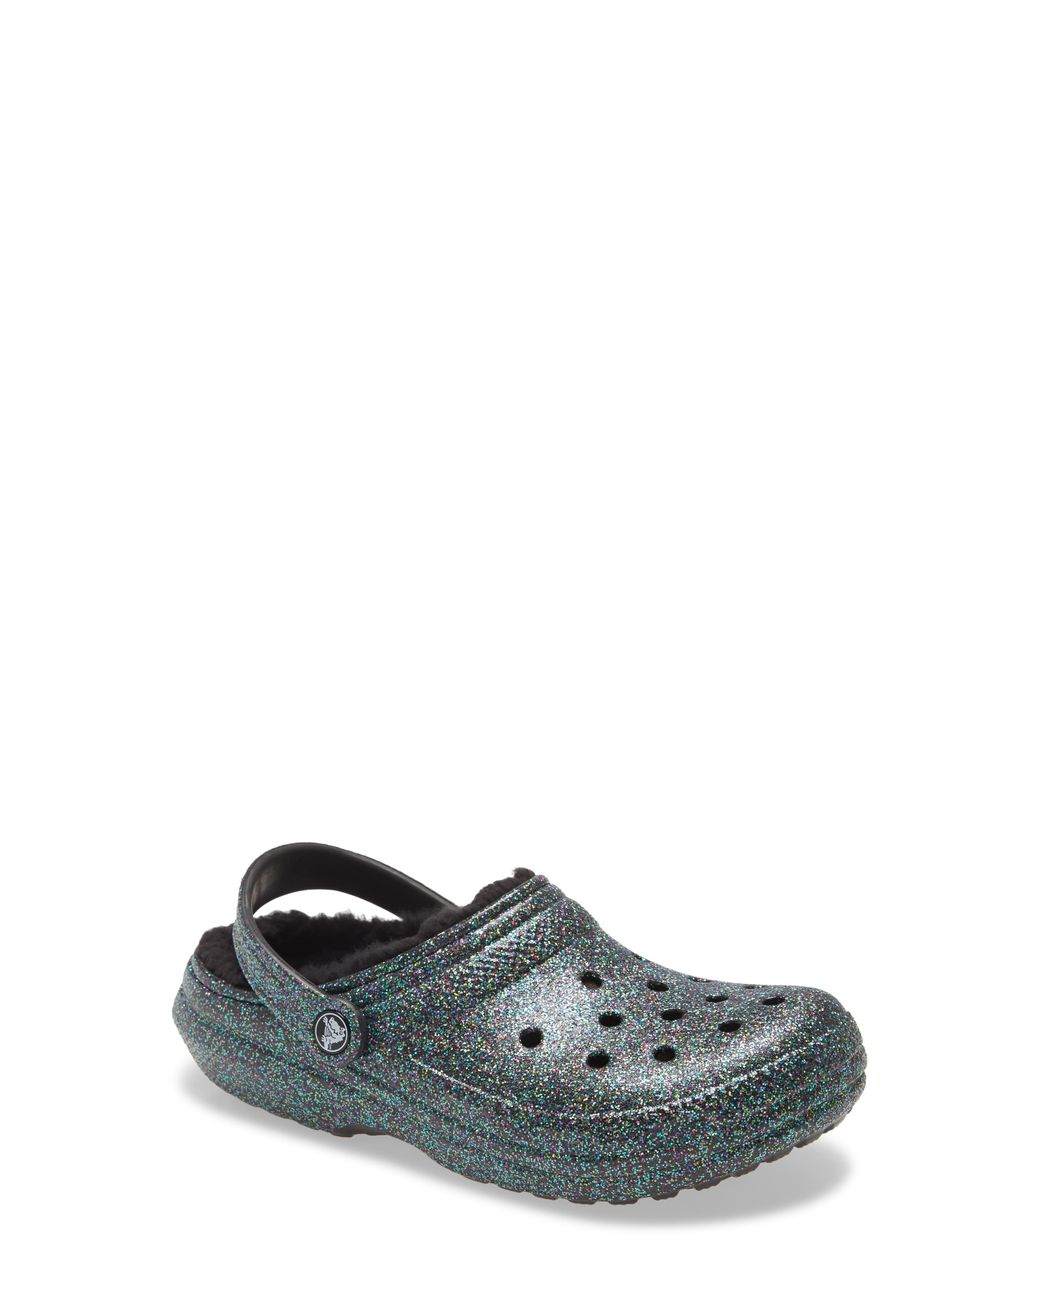 Crocs™ Classic Glitter Lined Clog In Starry Skies Glitter At Nordstrom ...